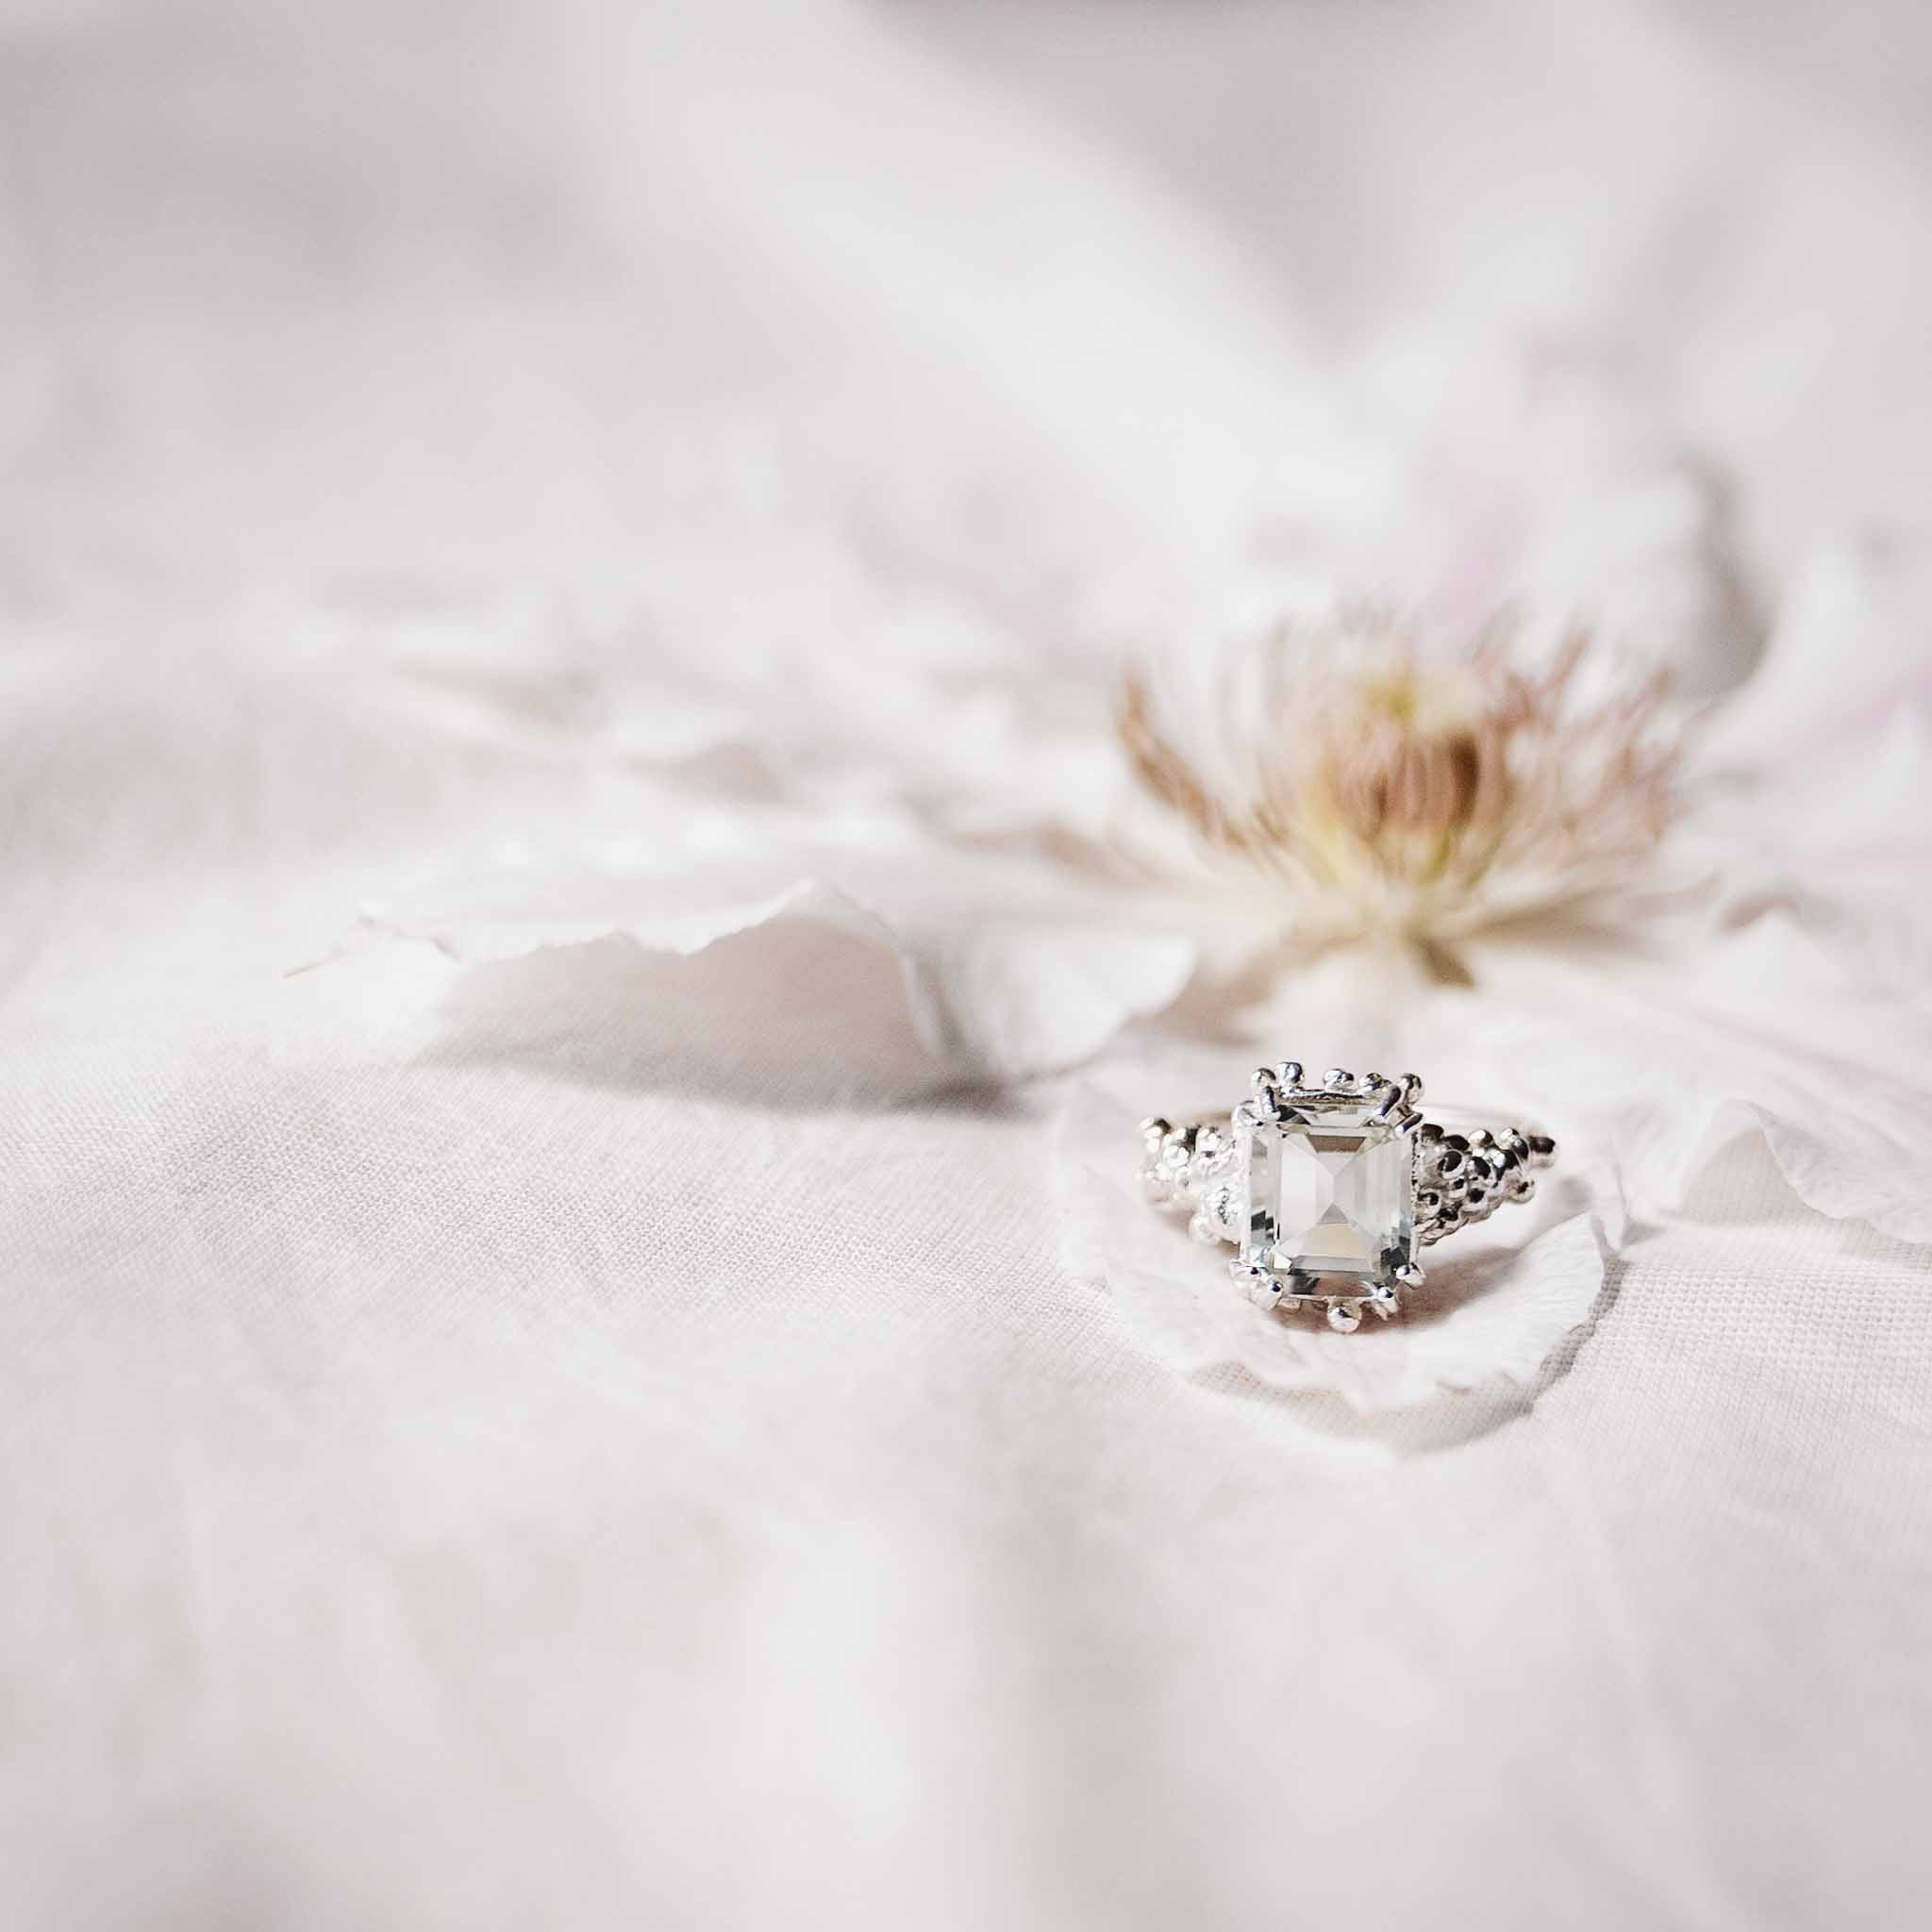 Planning a Christmas proposal? Check out these alternative engagement rings - Dainty London